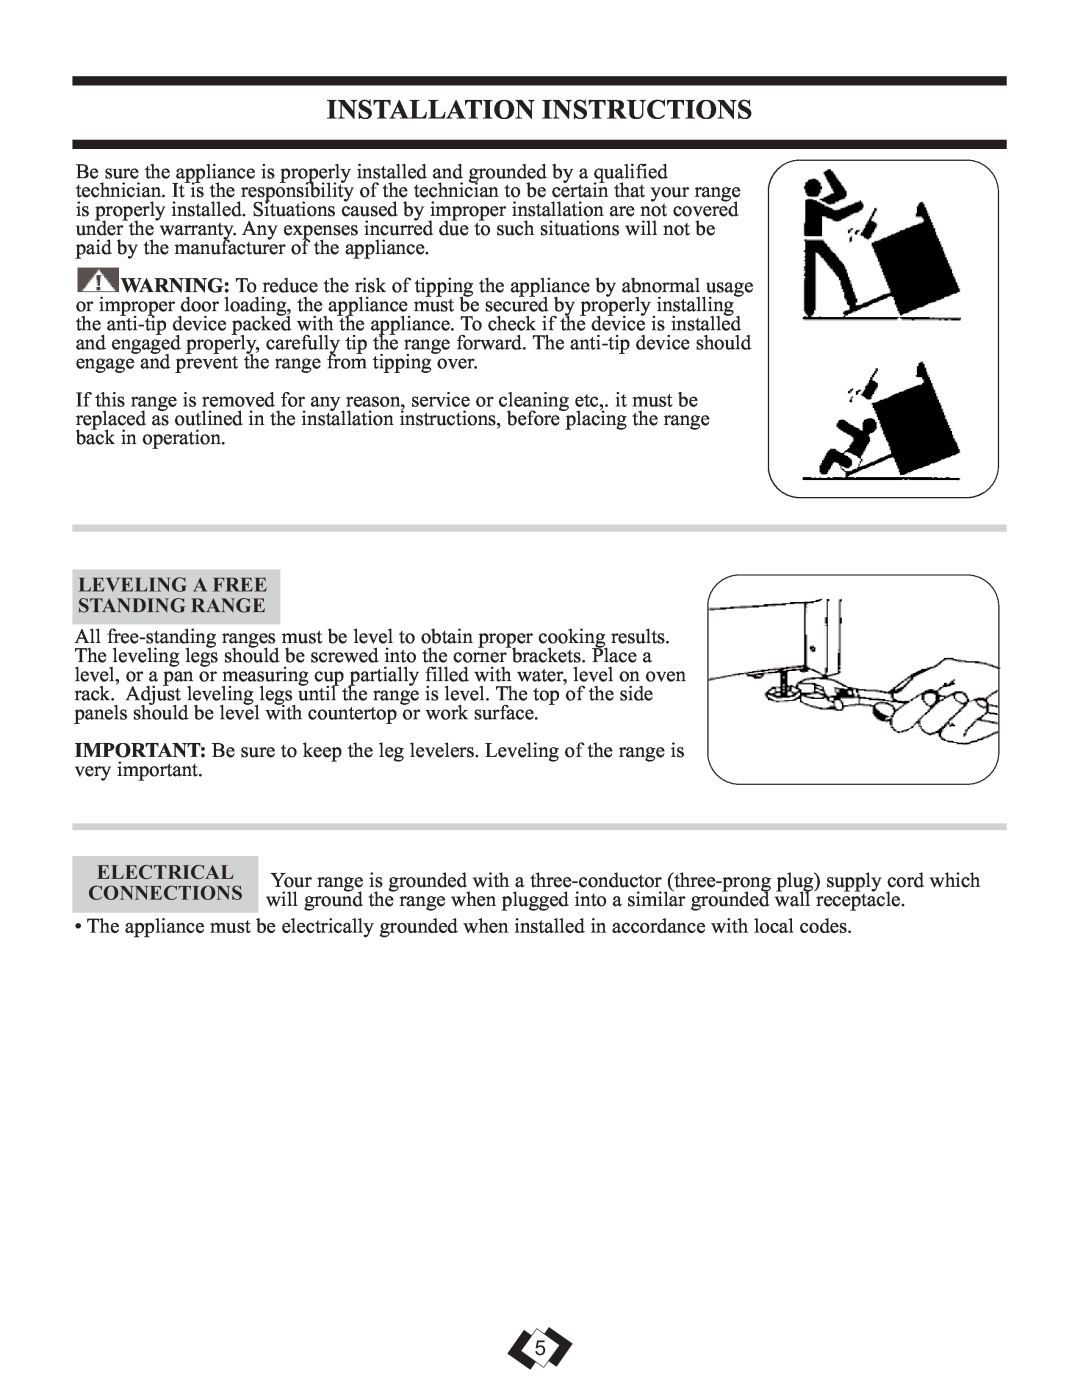 Danby DER2009W installation instructions Installation Instructions, Leveling A Free Standing Range, Electrical 